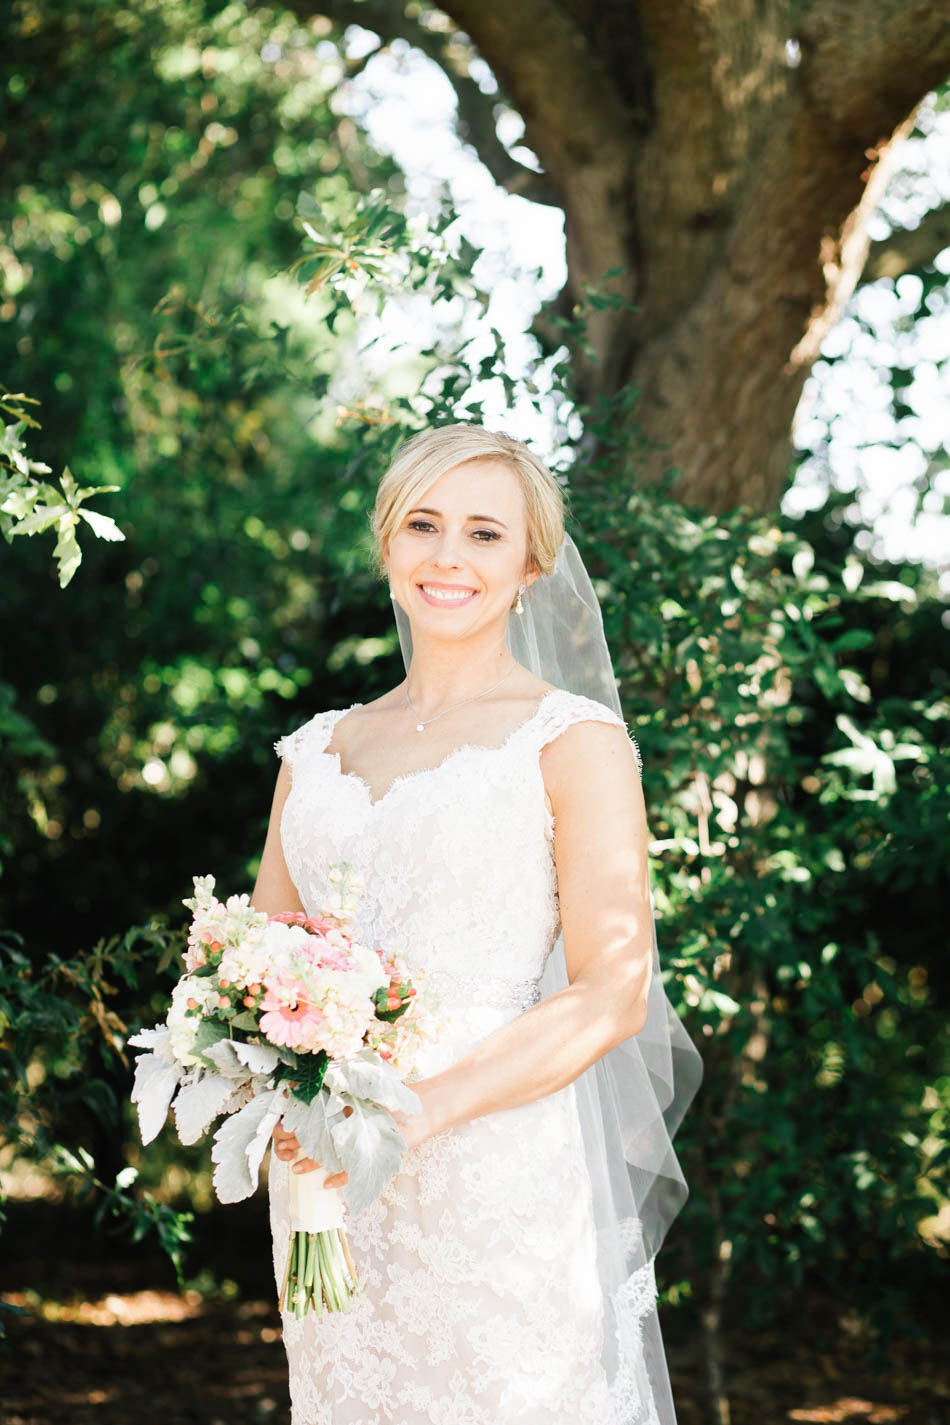 Bride stands among the trees, Alhambra Hall, Mt Pleasant, South Carolina Kate Timbers Photography. http://katetimbers.com #katetimbersphotography // Charleston Photography // Inspiration